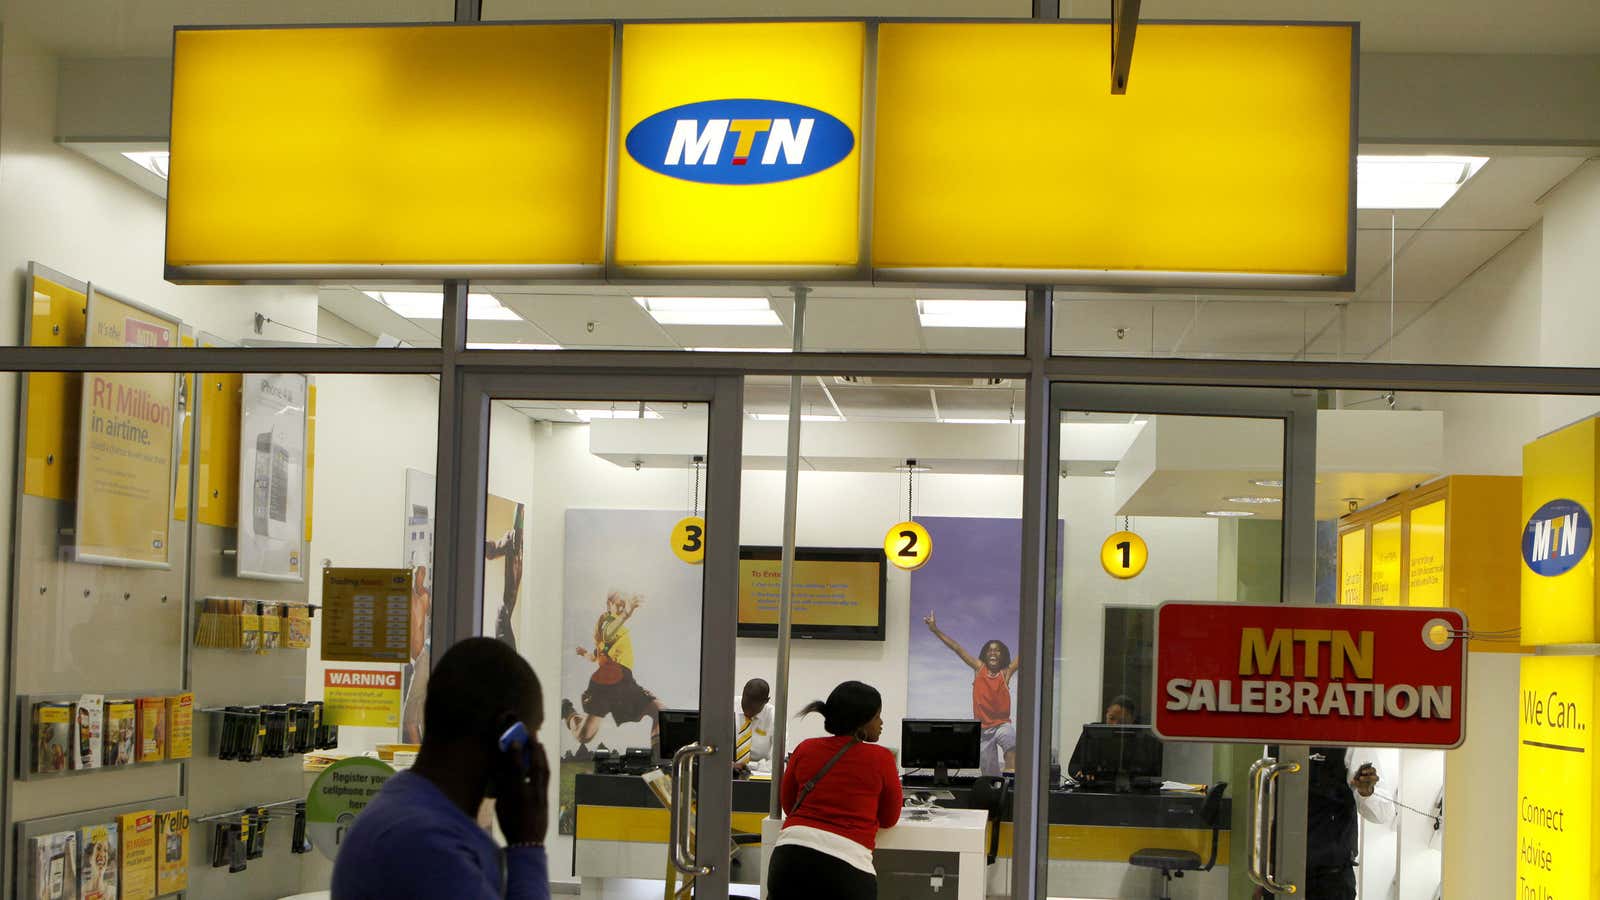 Phone networks like MTN were set to increase costs of services.